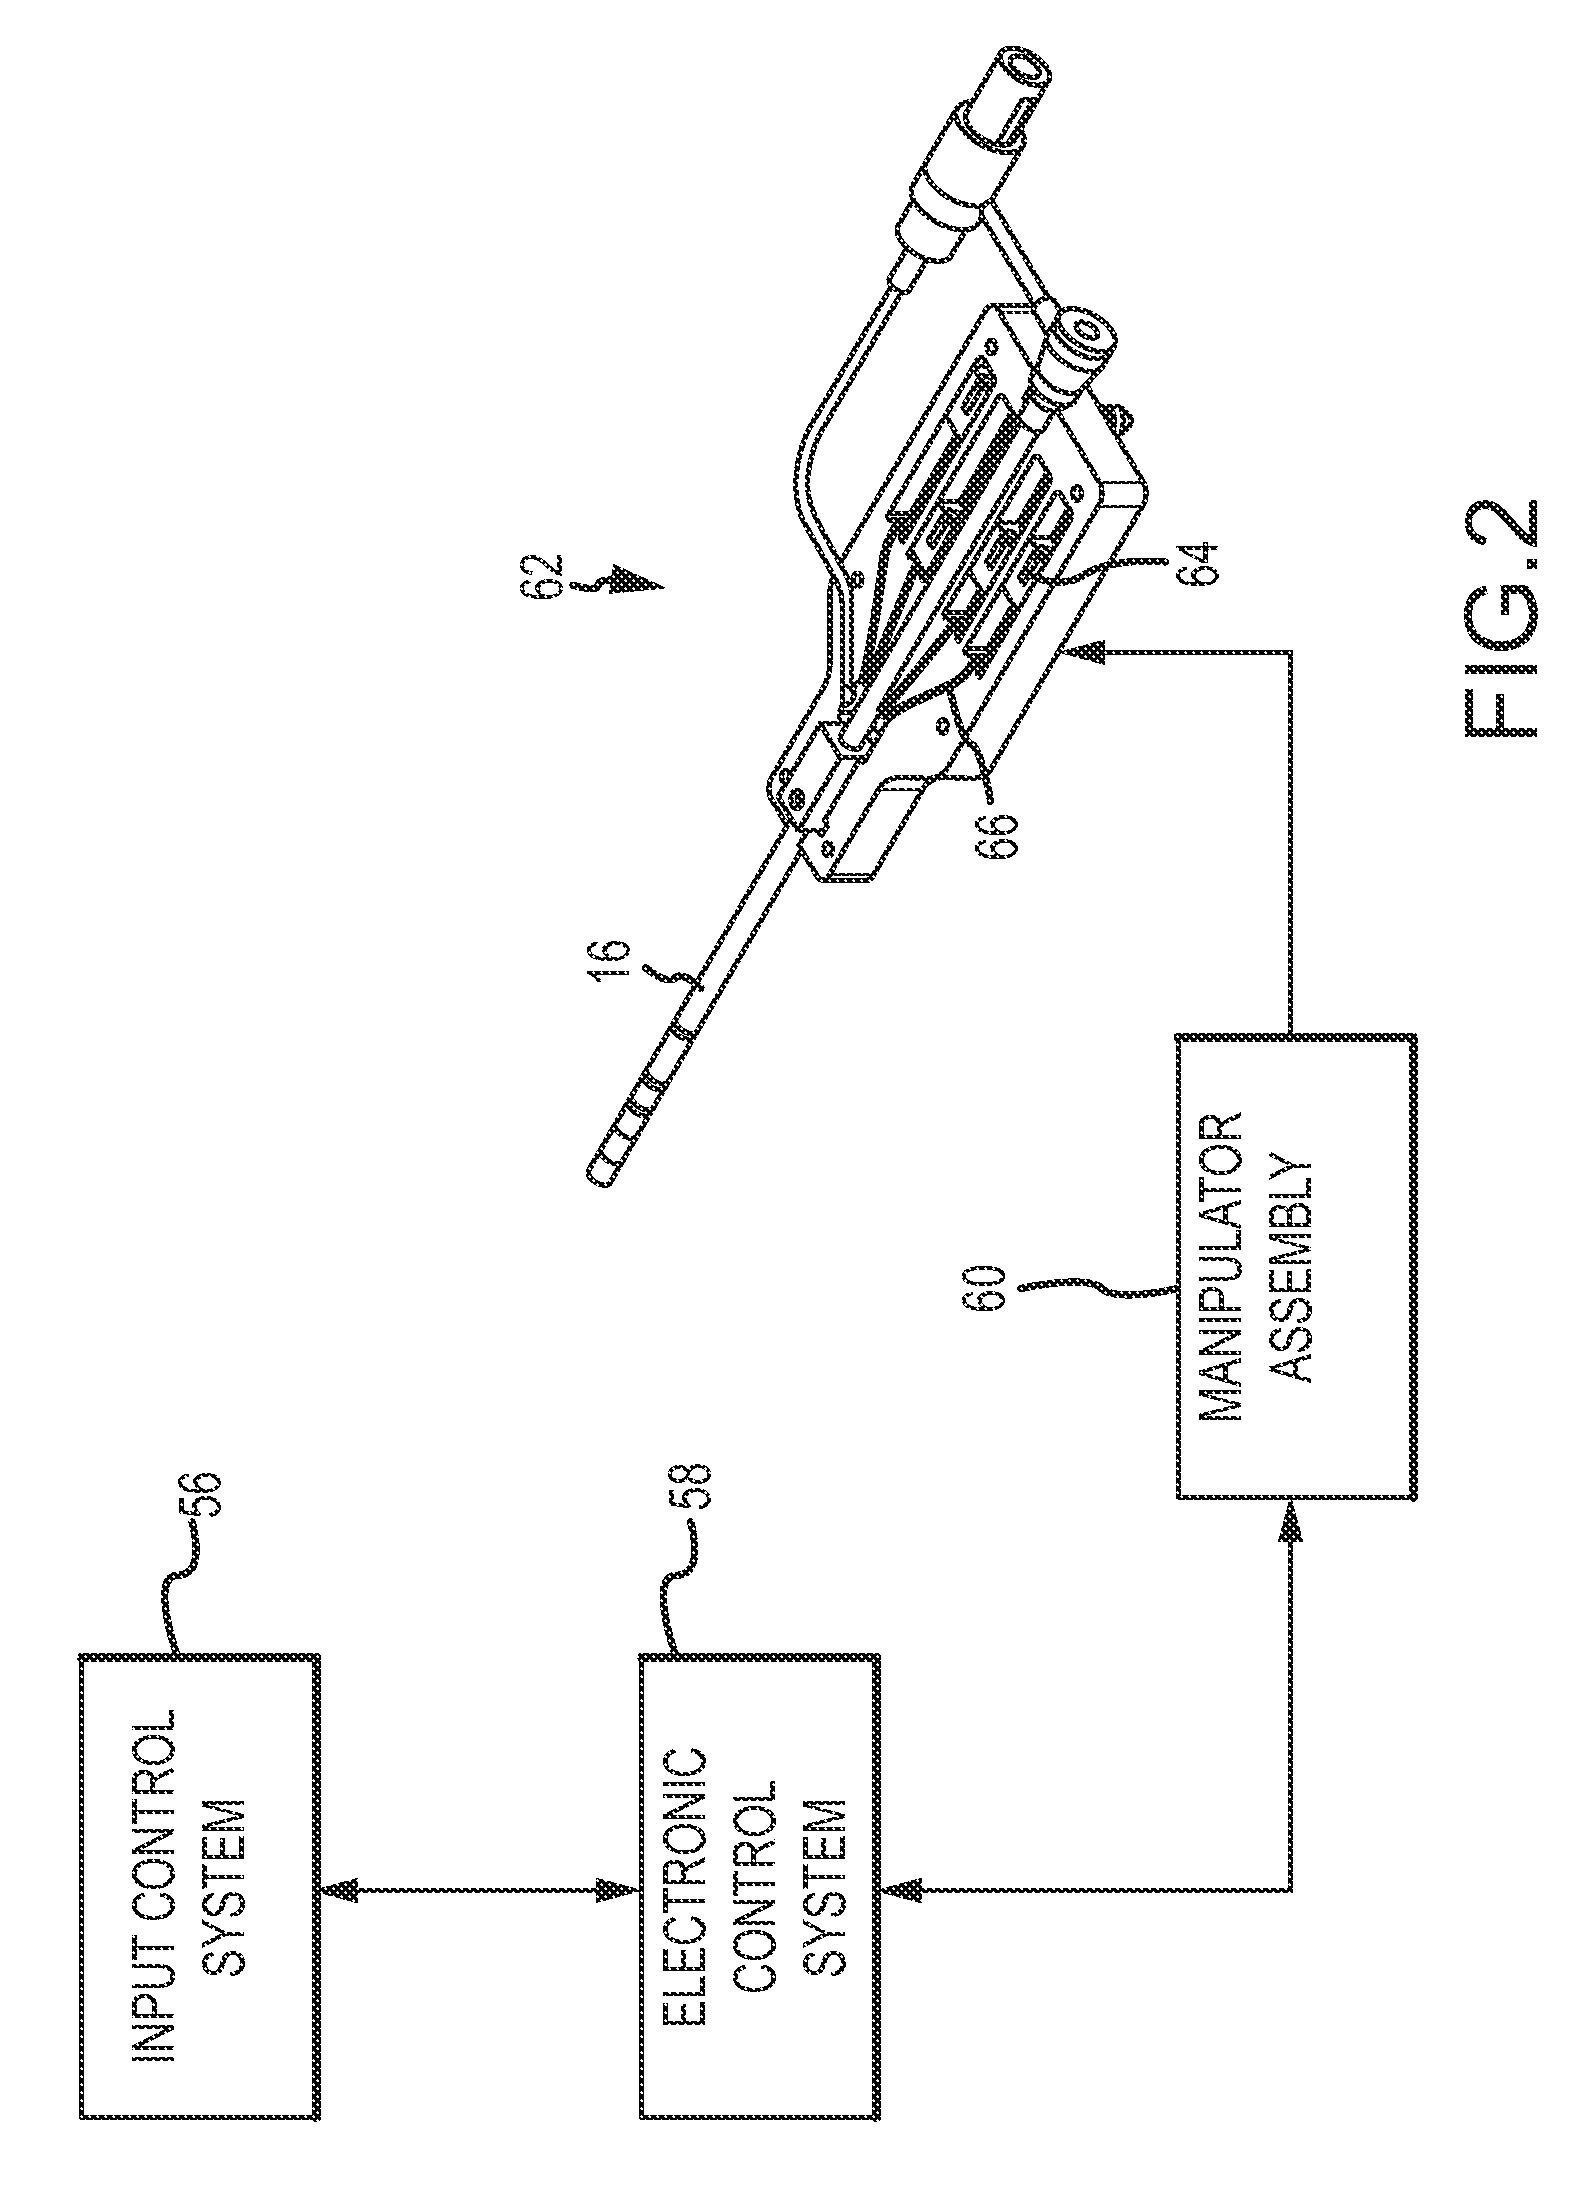 System and method for controlling delivery of ablation energy to tissue